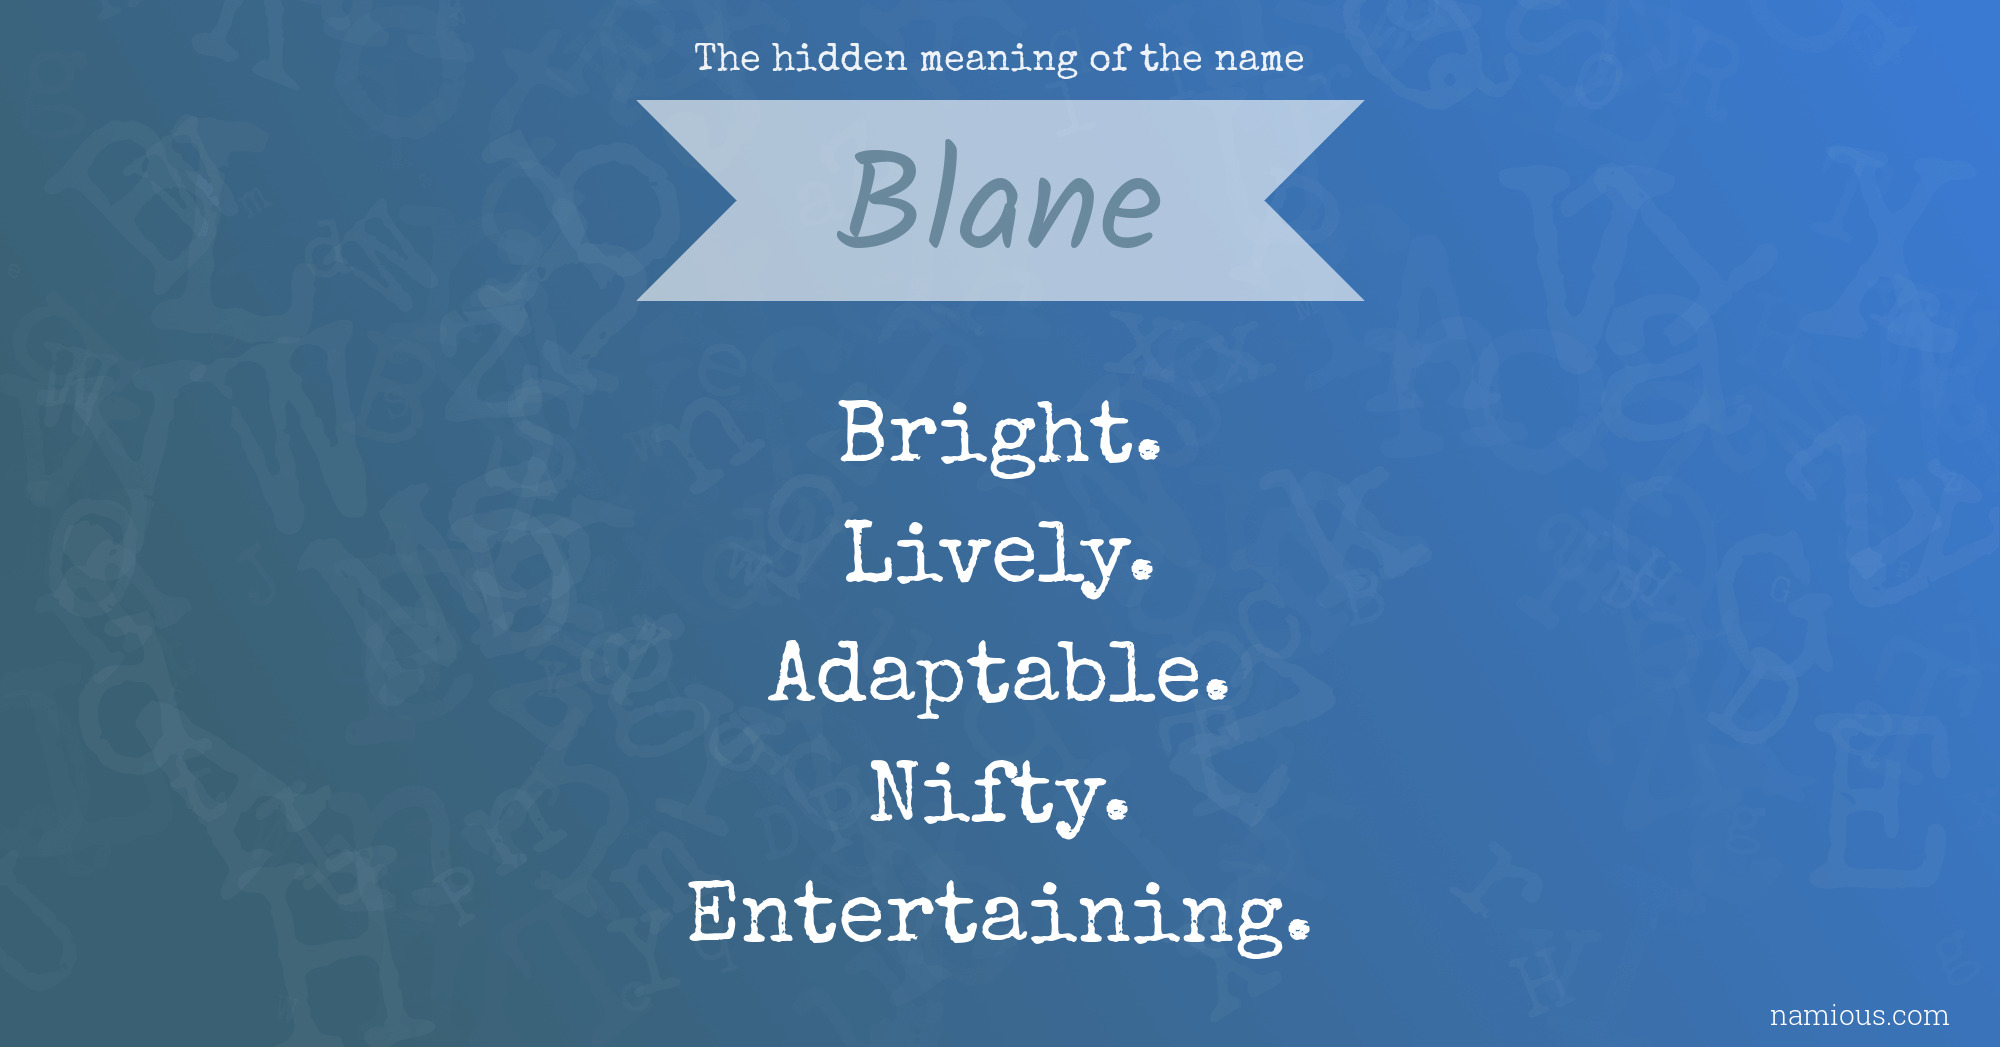 The hidden meaning of the name Blane